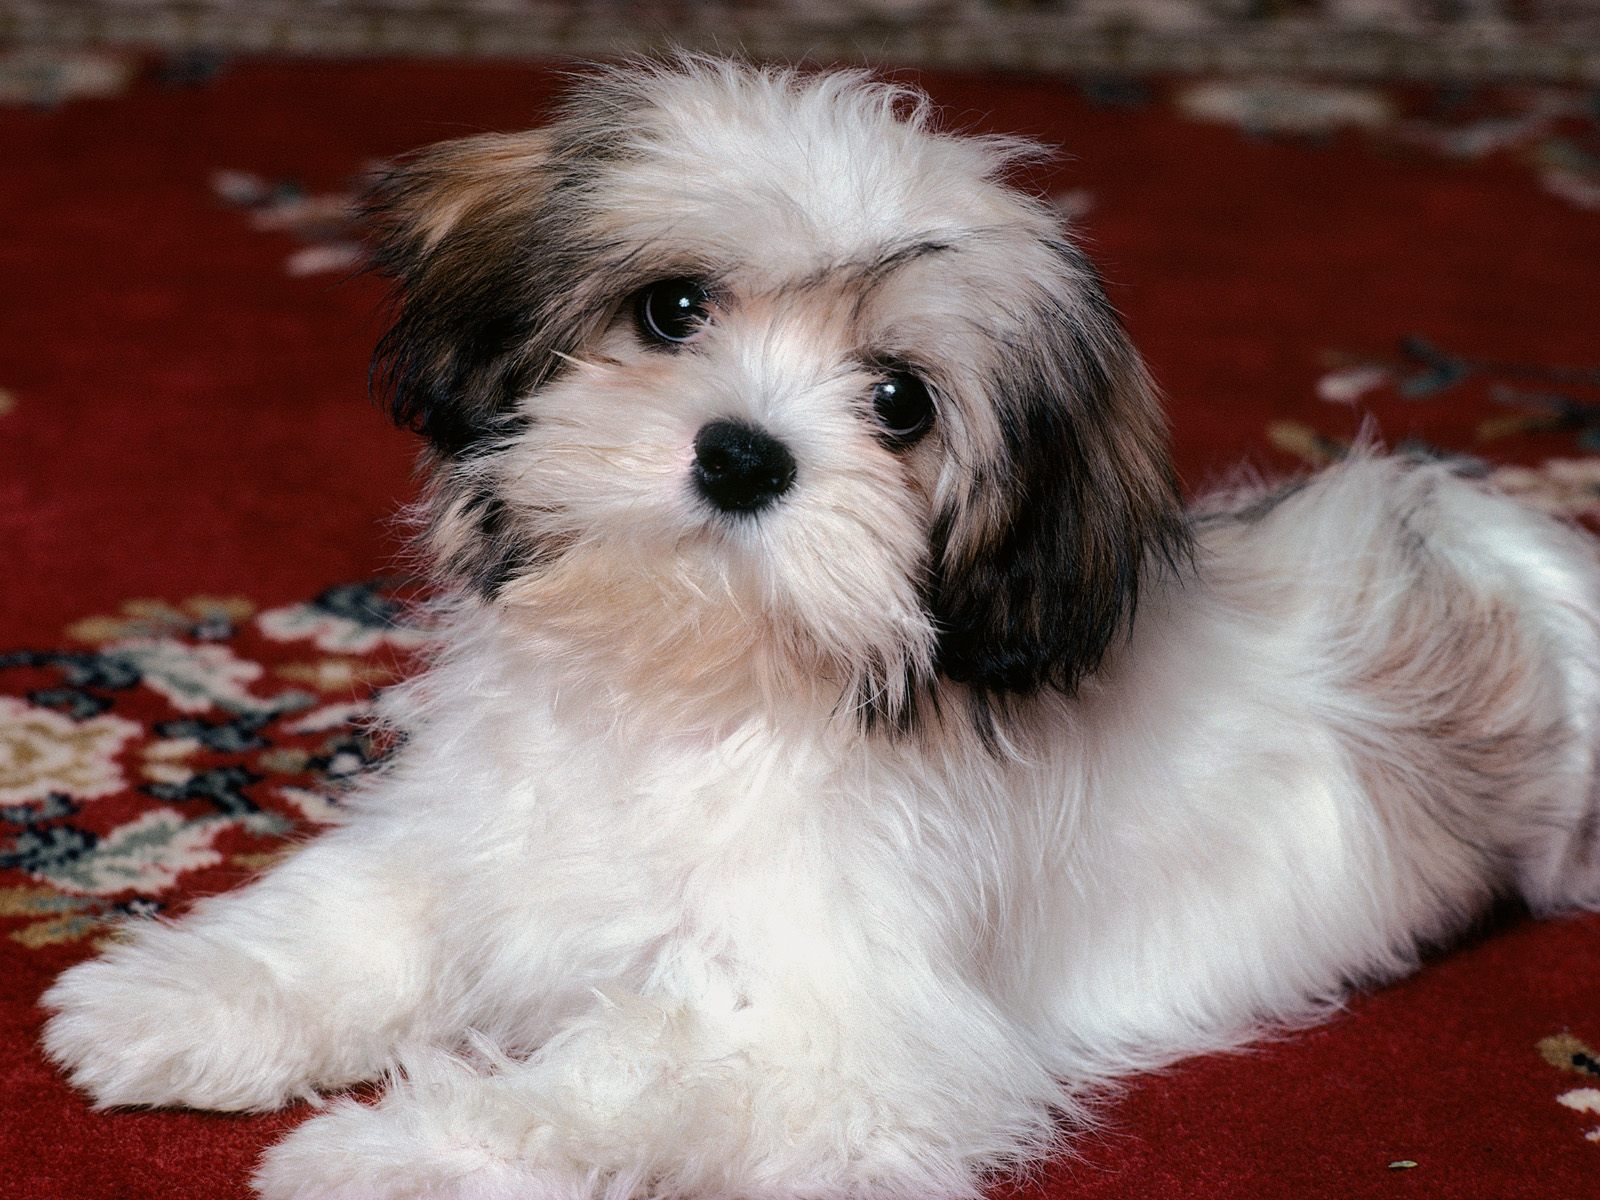 most 10 cute baby dog pictures - the best